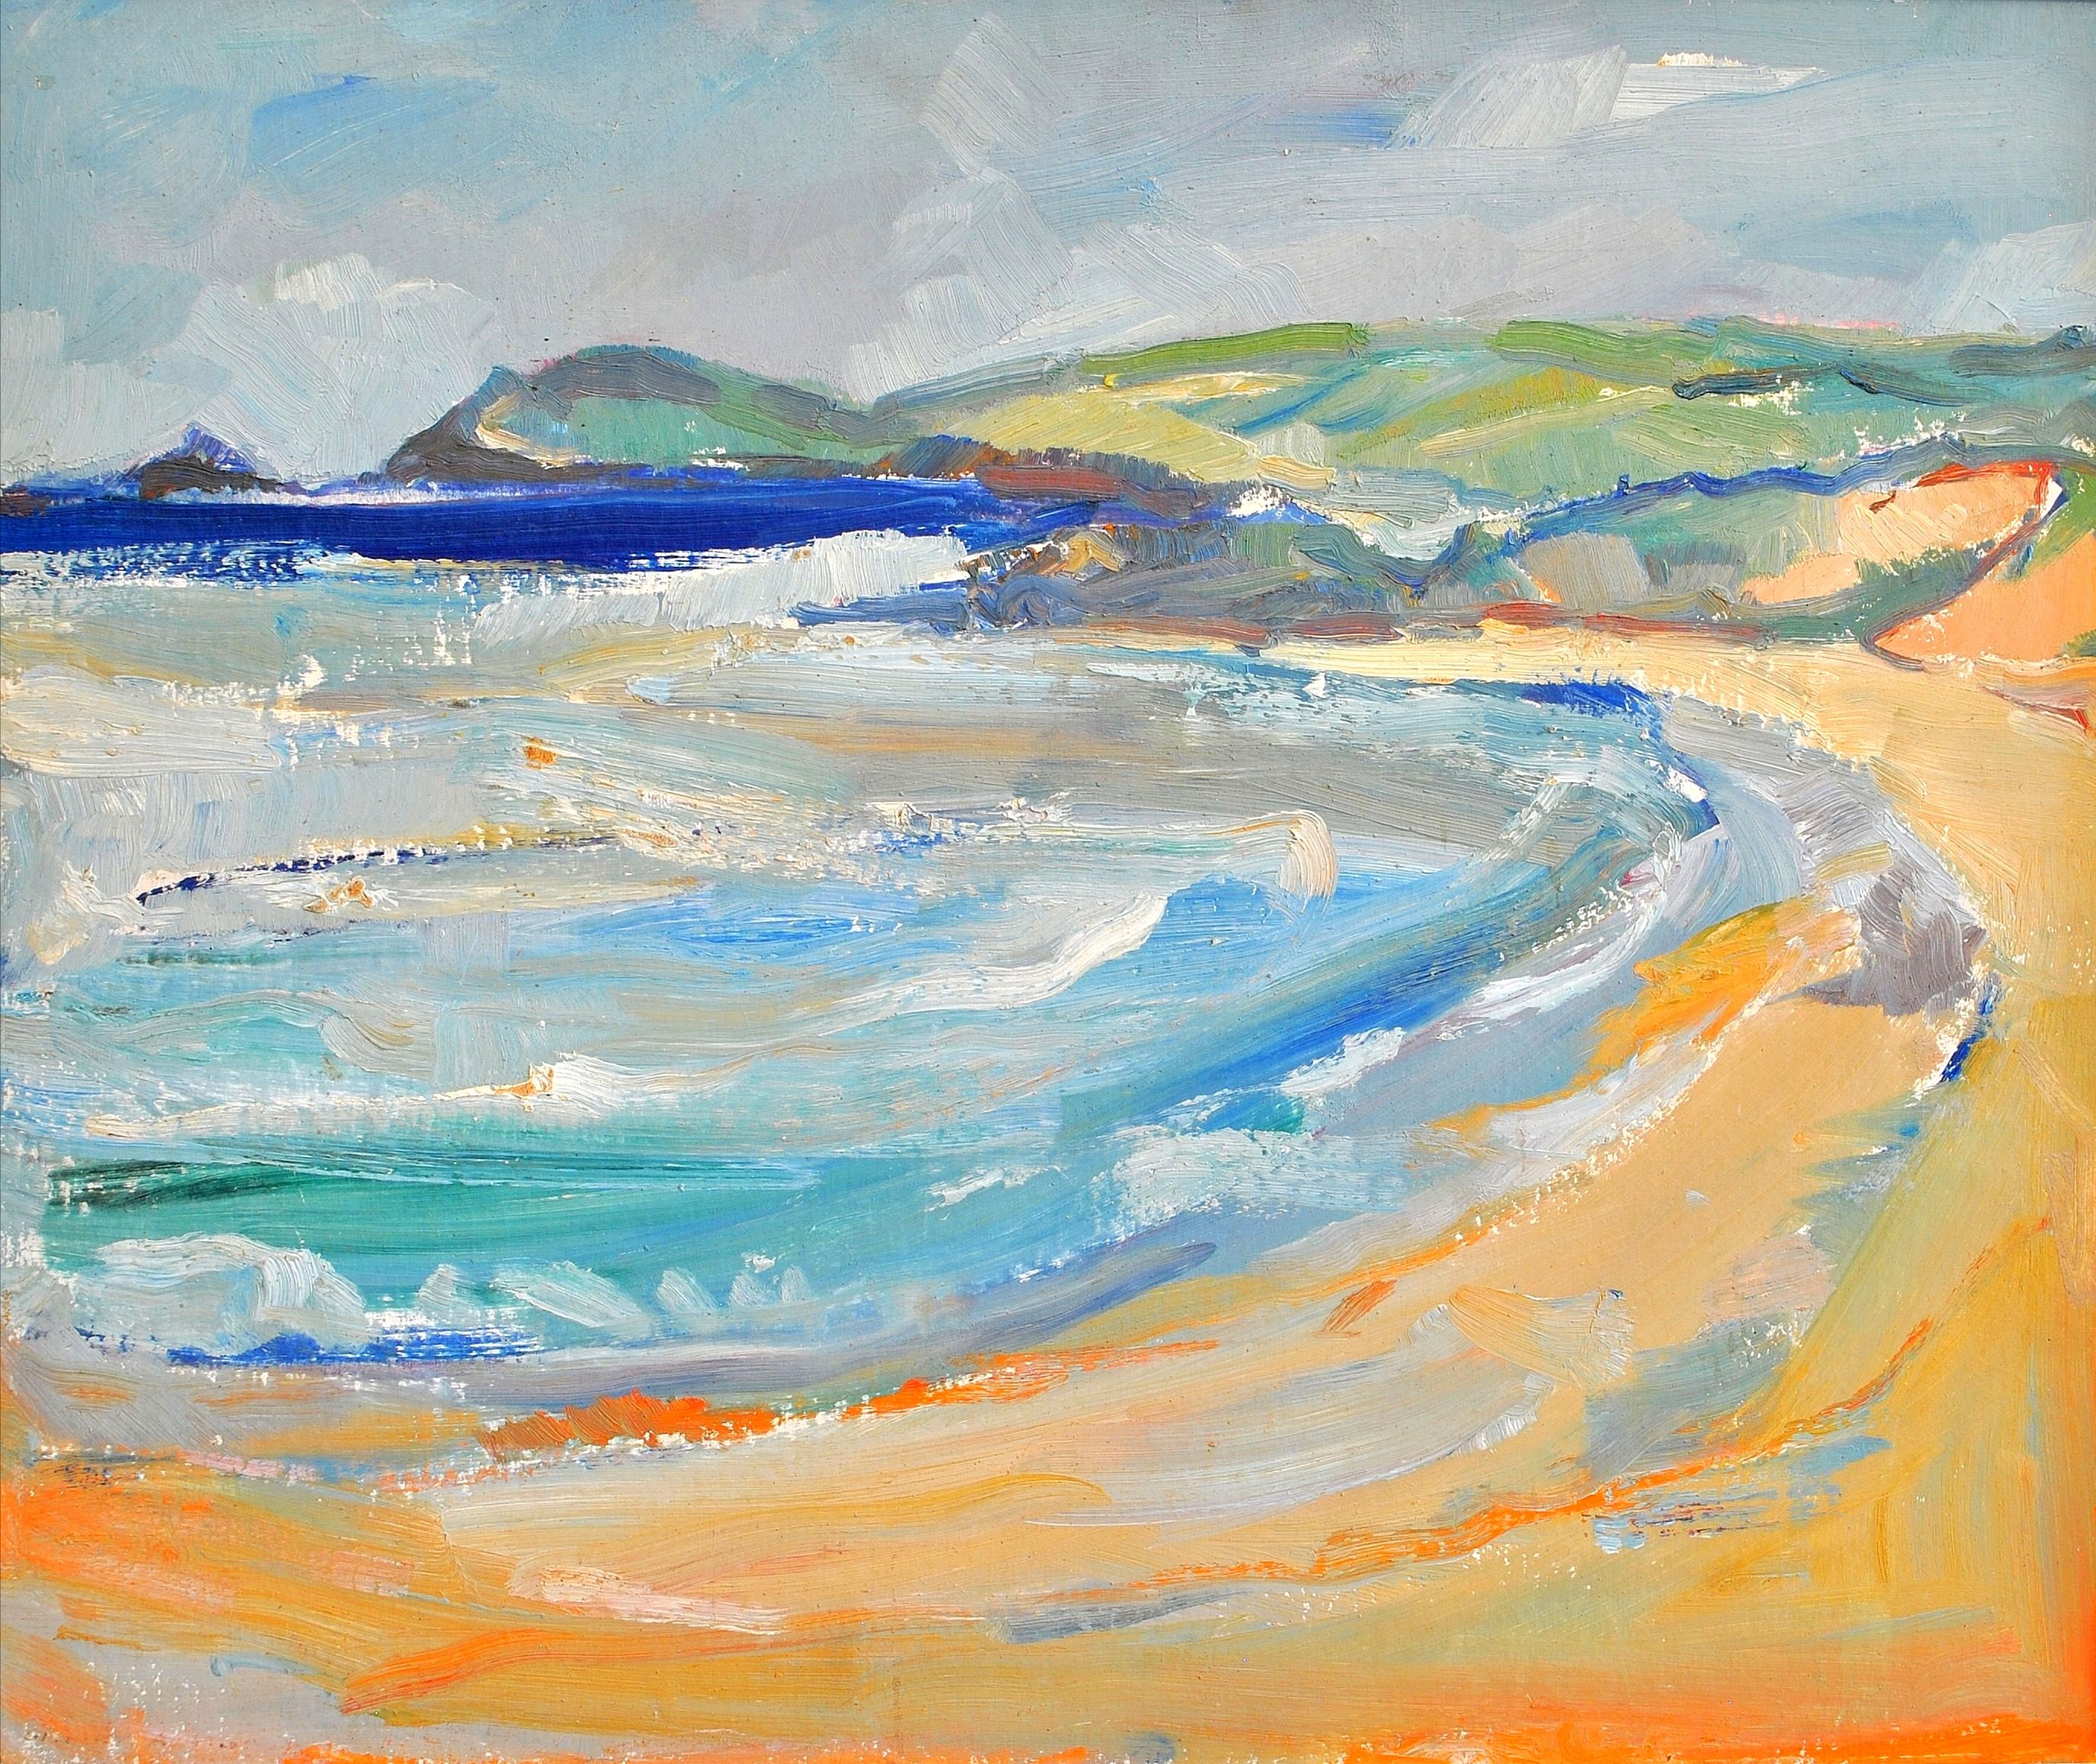 This very beautiful mid 20th century impressionist oil on board by Gilbert Adams depicts Constantine Bay in North Cornwall, known as one of the best surfing spots in the county. The artist has captured the bay on a sunny summers day using a